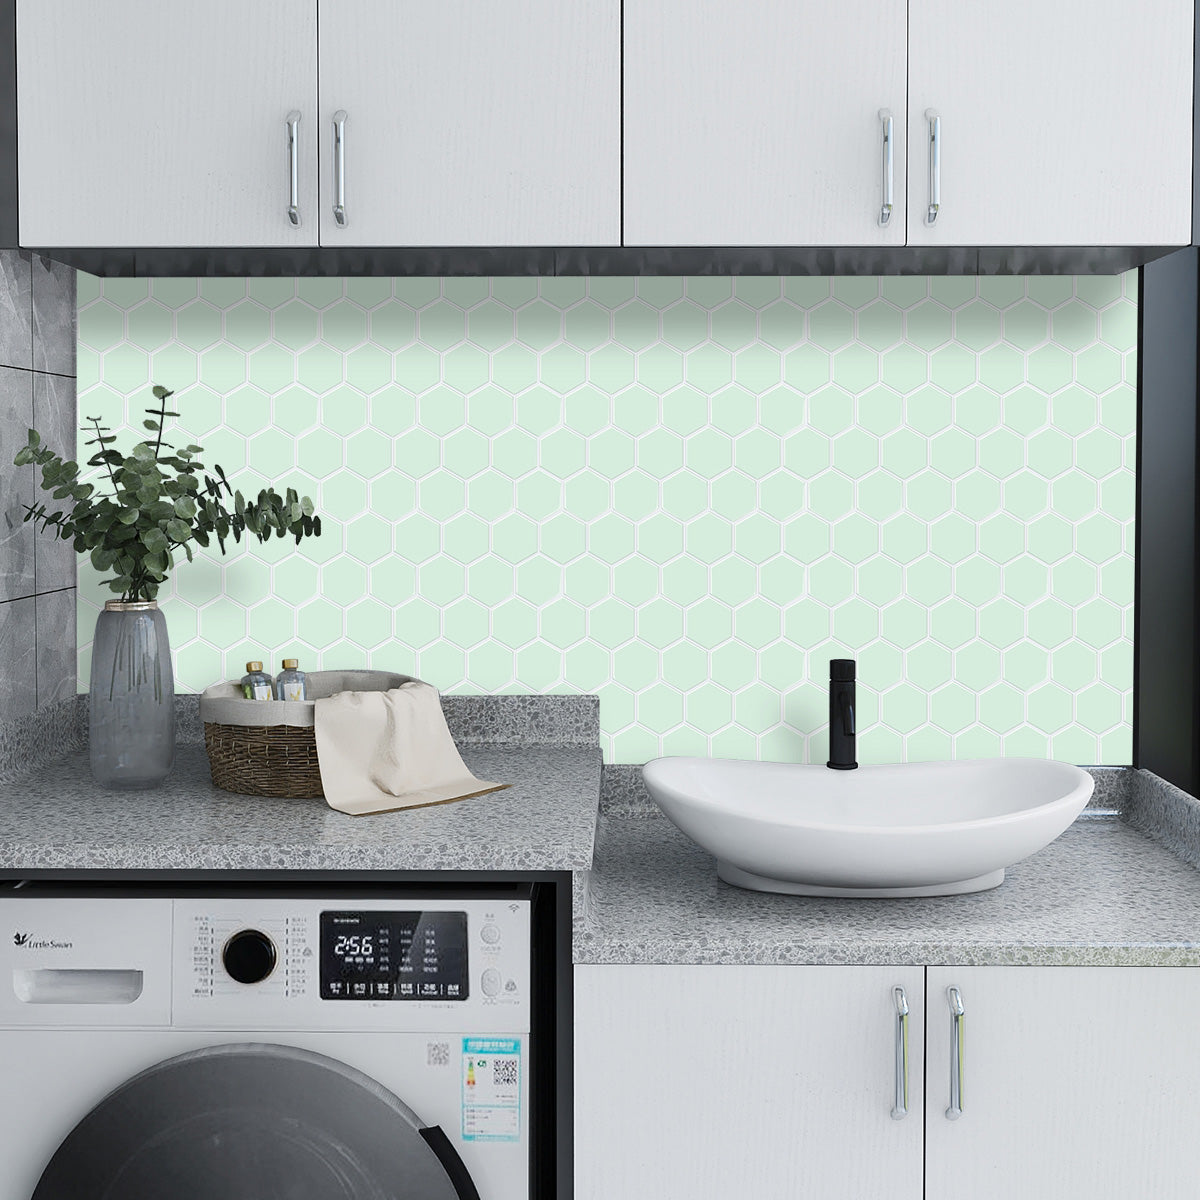 Laundry with mint green hexagon tiles